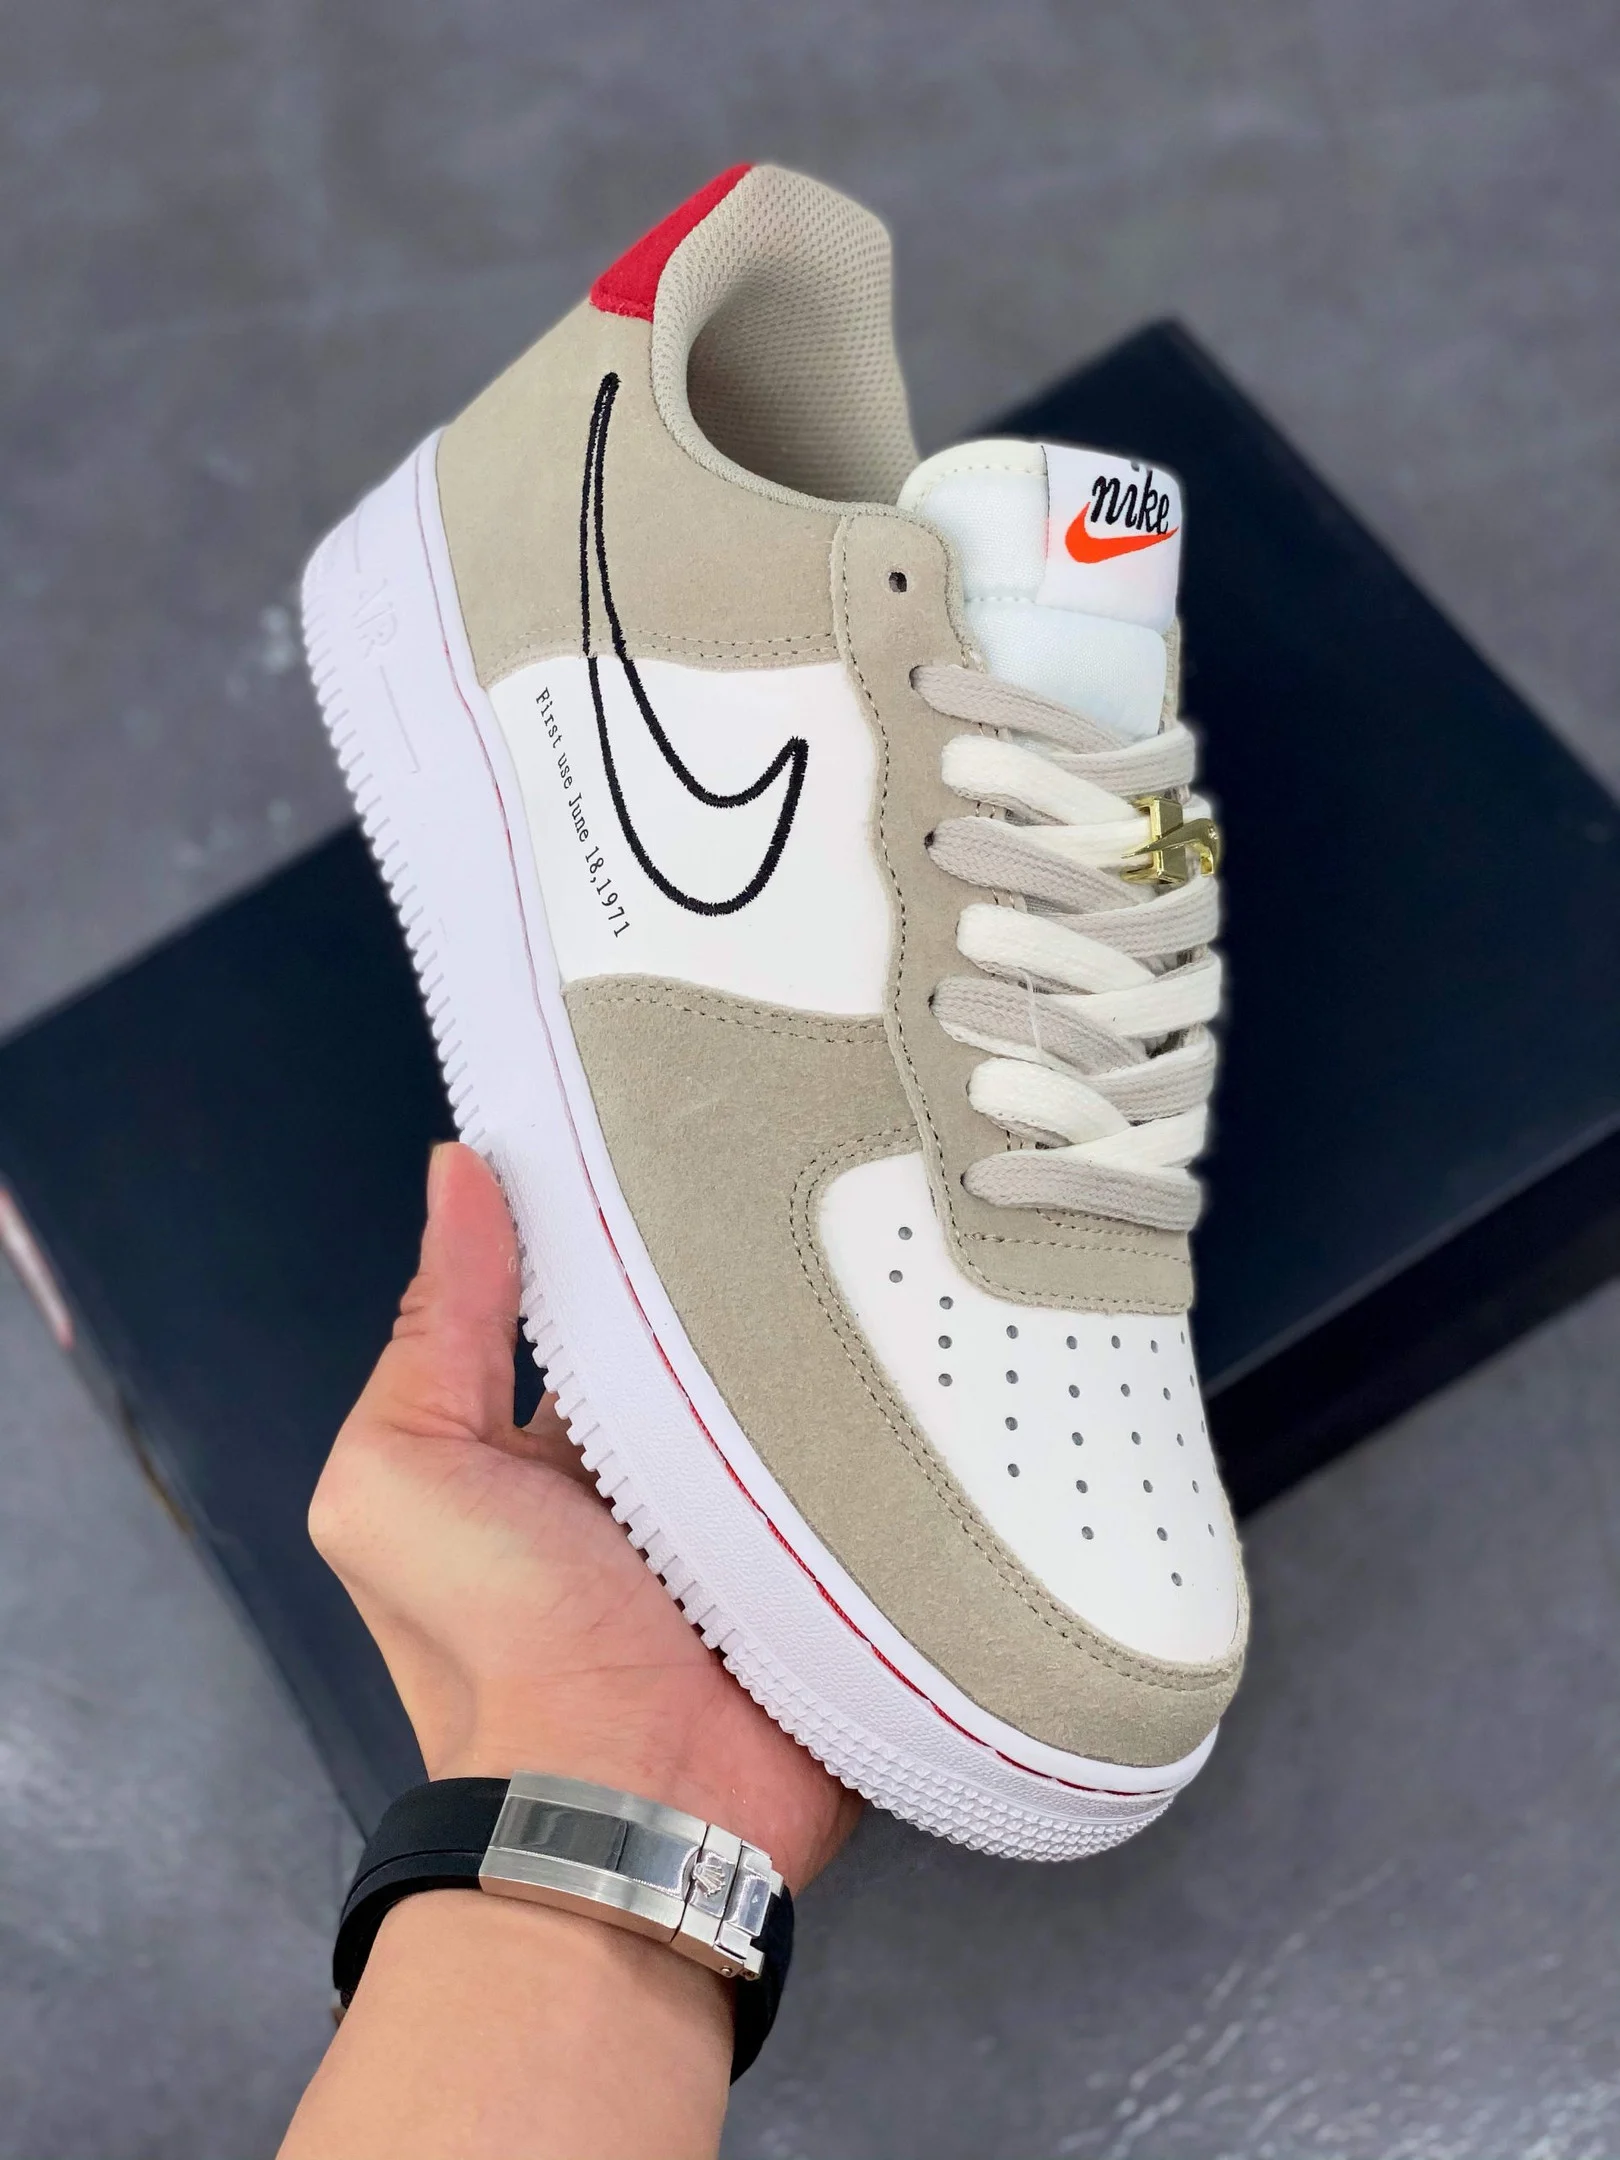 Nike Air Force 1 Low First Use Light Stone Black-Sail-University Red For Sale